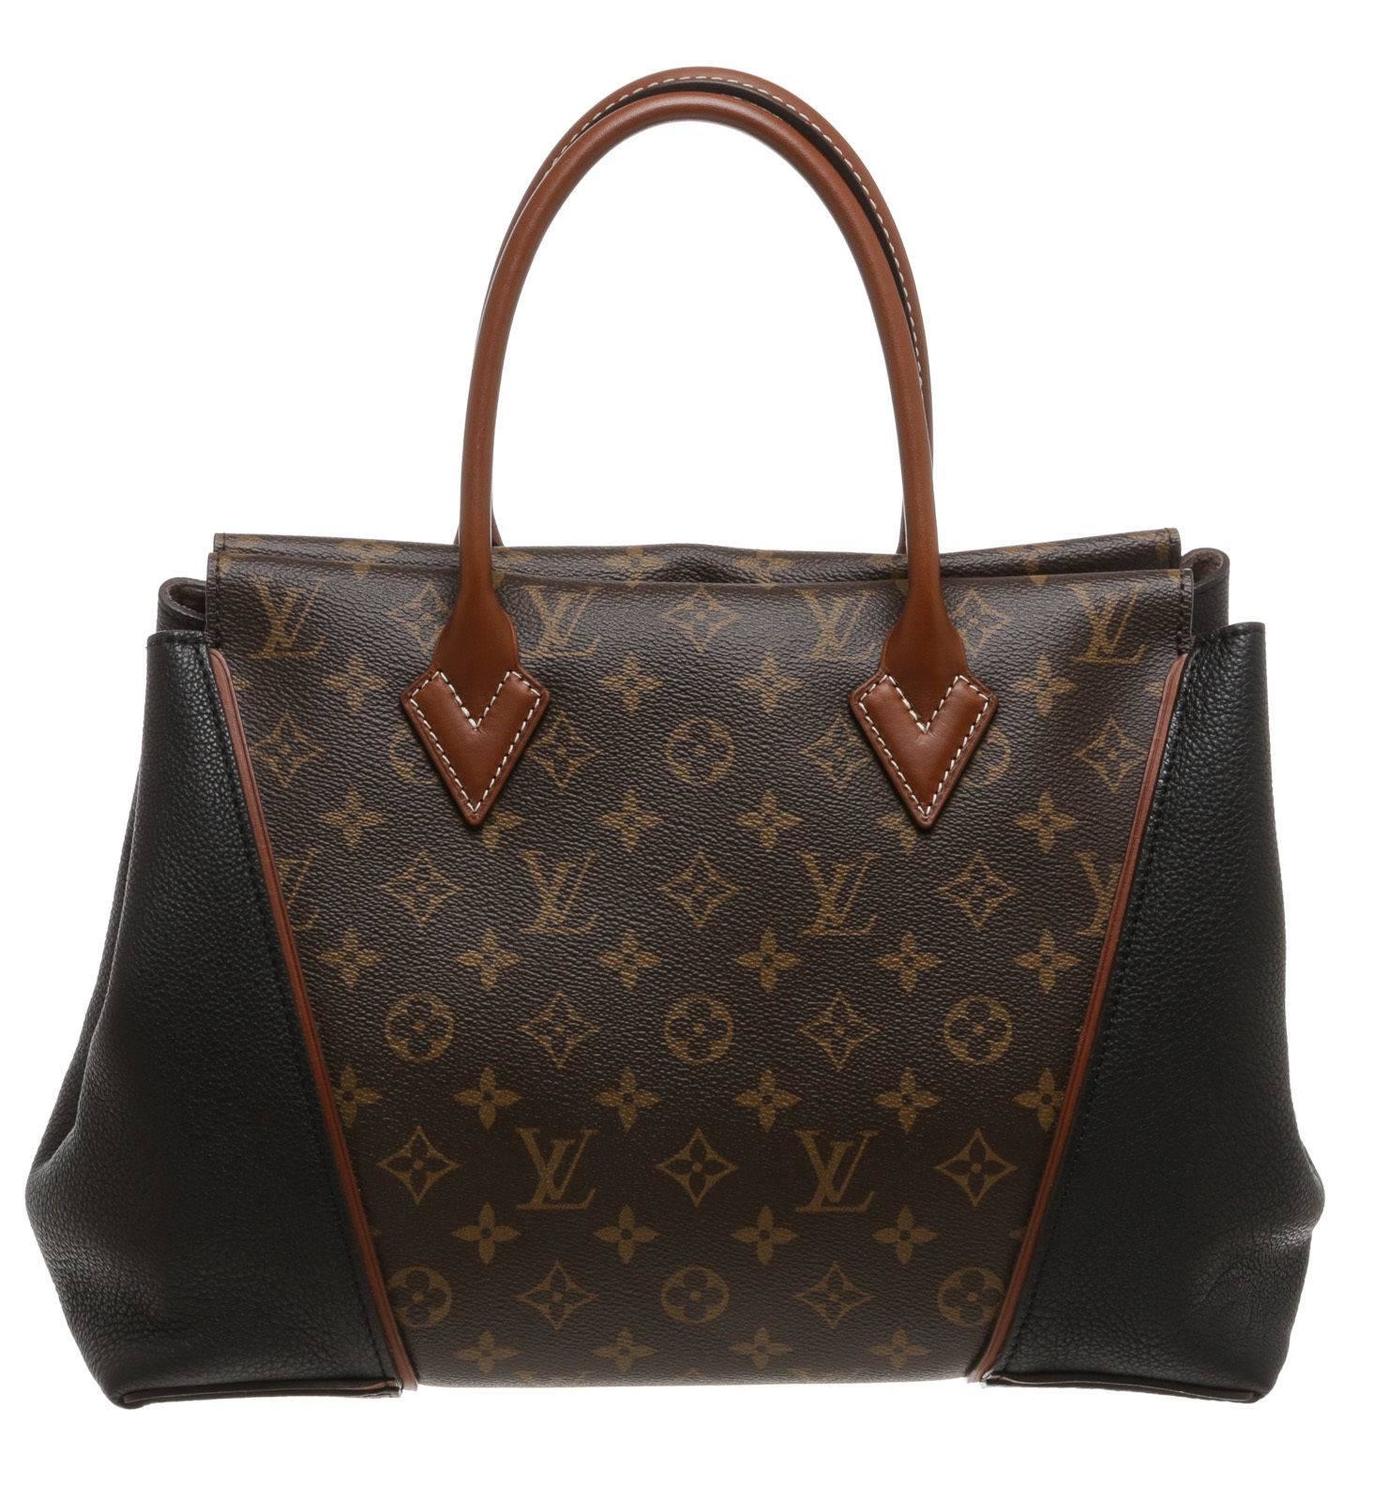 Louis Vuitton V Tote Mm Noir | Confederated Tribes of the Umatilla Indian Reservation